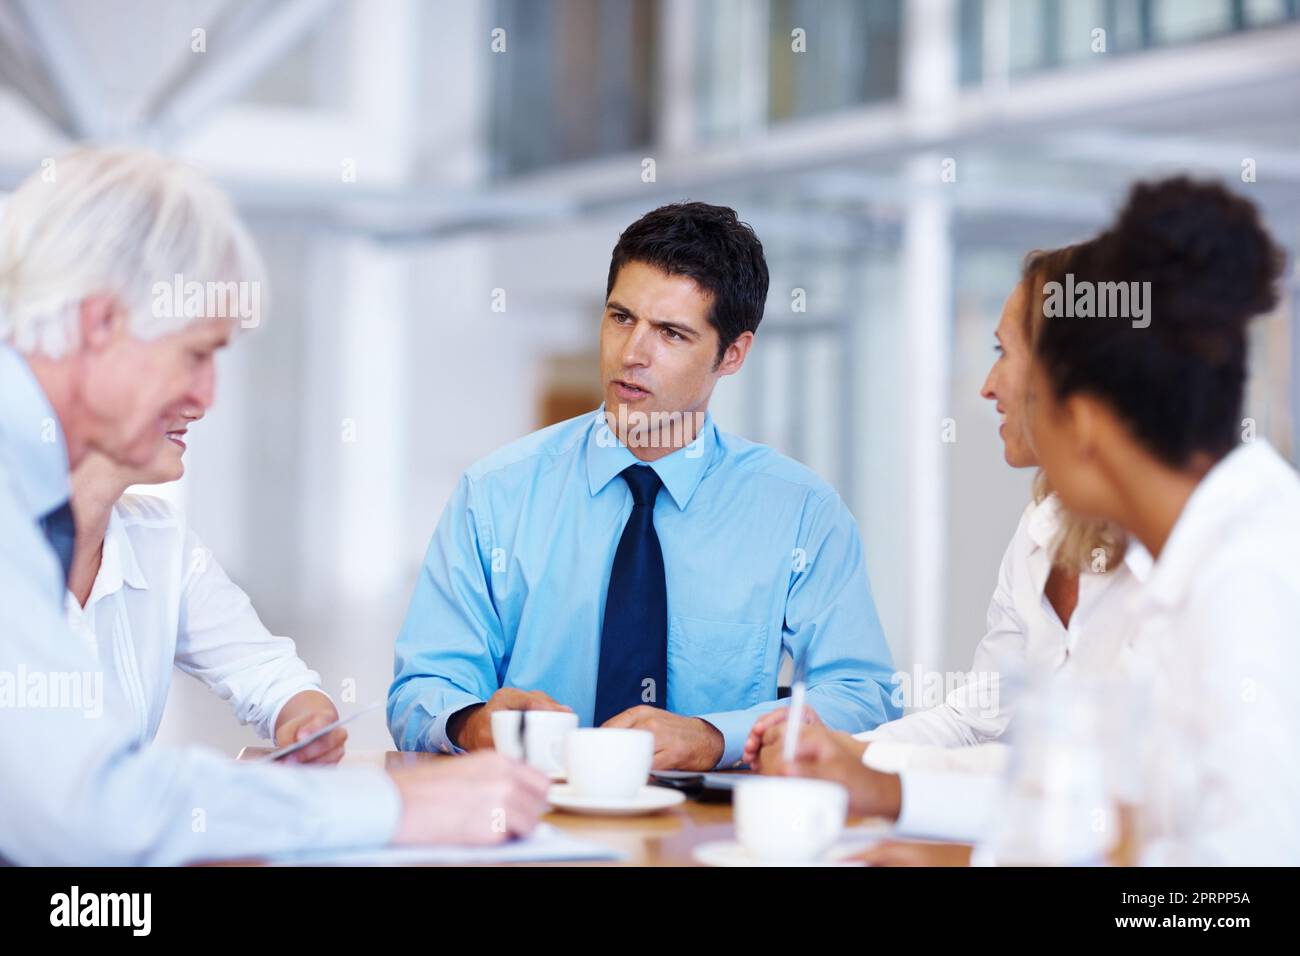 Business meeting. Portrait of multi ethnic business people discussing in conference meeting. Stock Photo